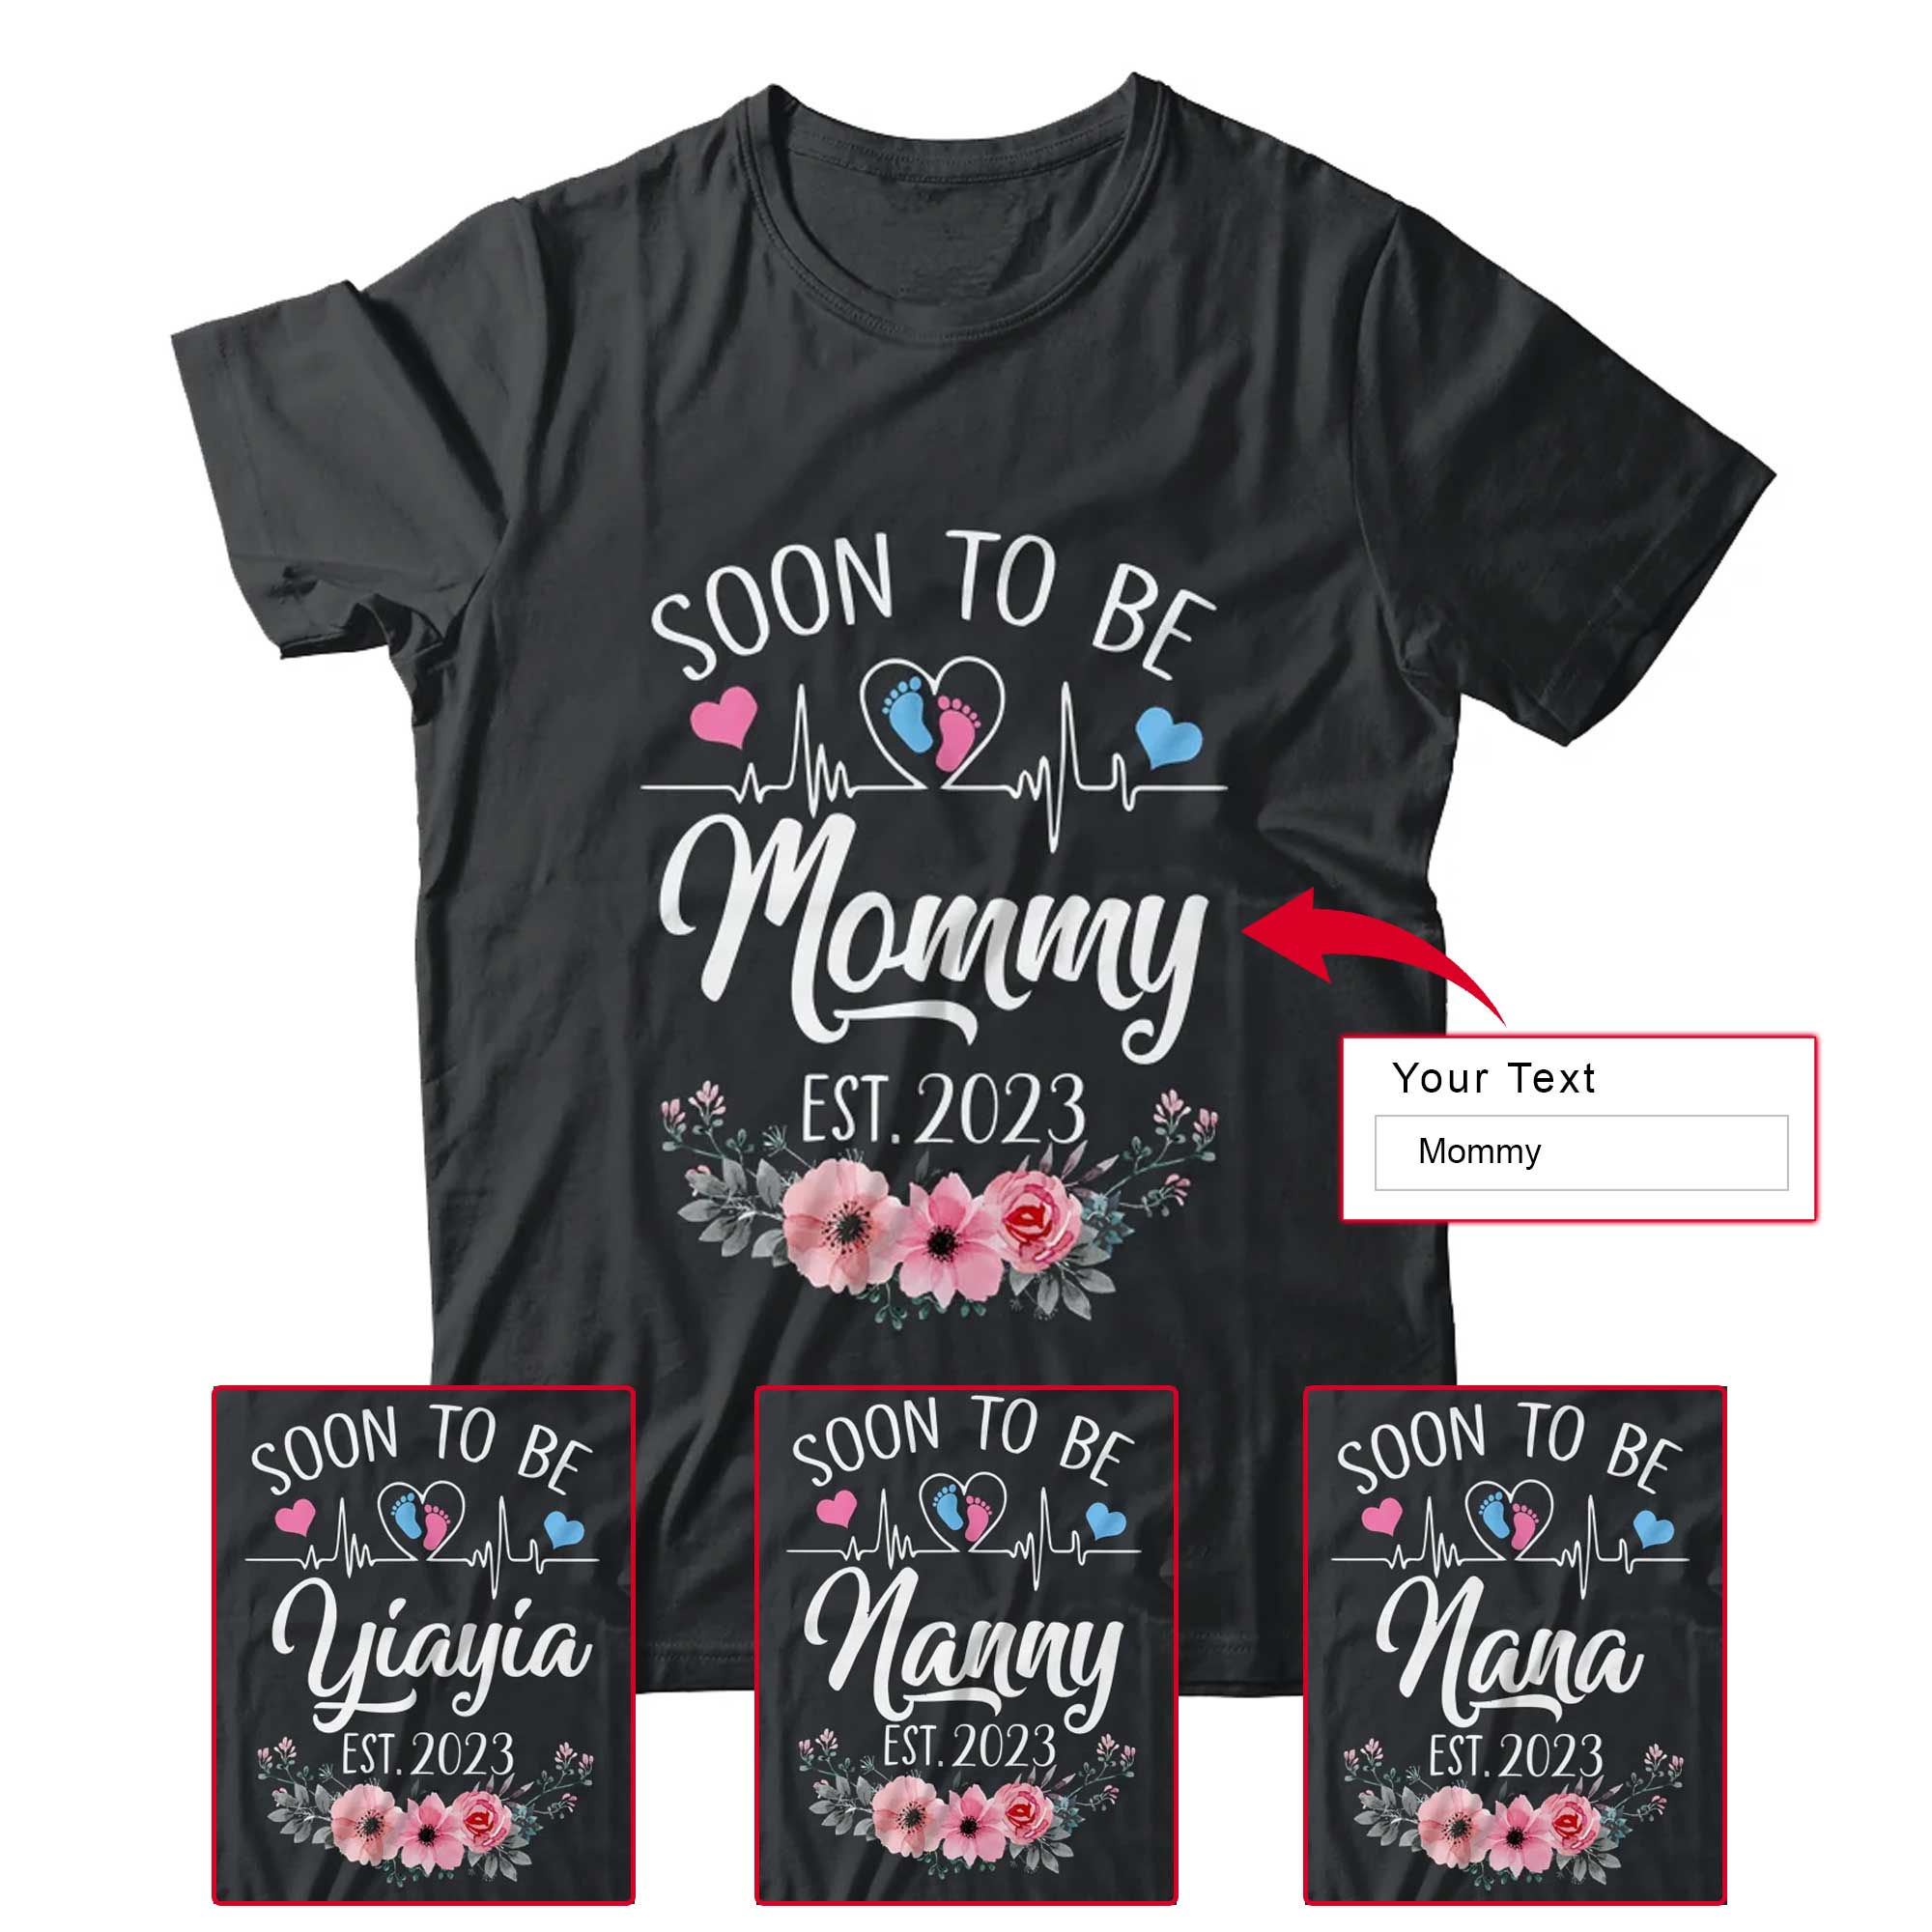 Mommy Floral Heart Beat Mother's Day T-shirt - Soon To Be Mommy Pregnancy Personalized Shirt - Custom Name And Year Shirt For Gigi, Nana, Mimi